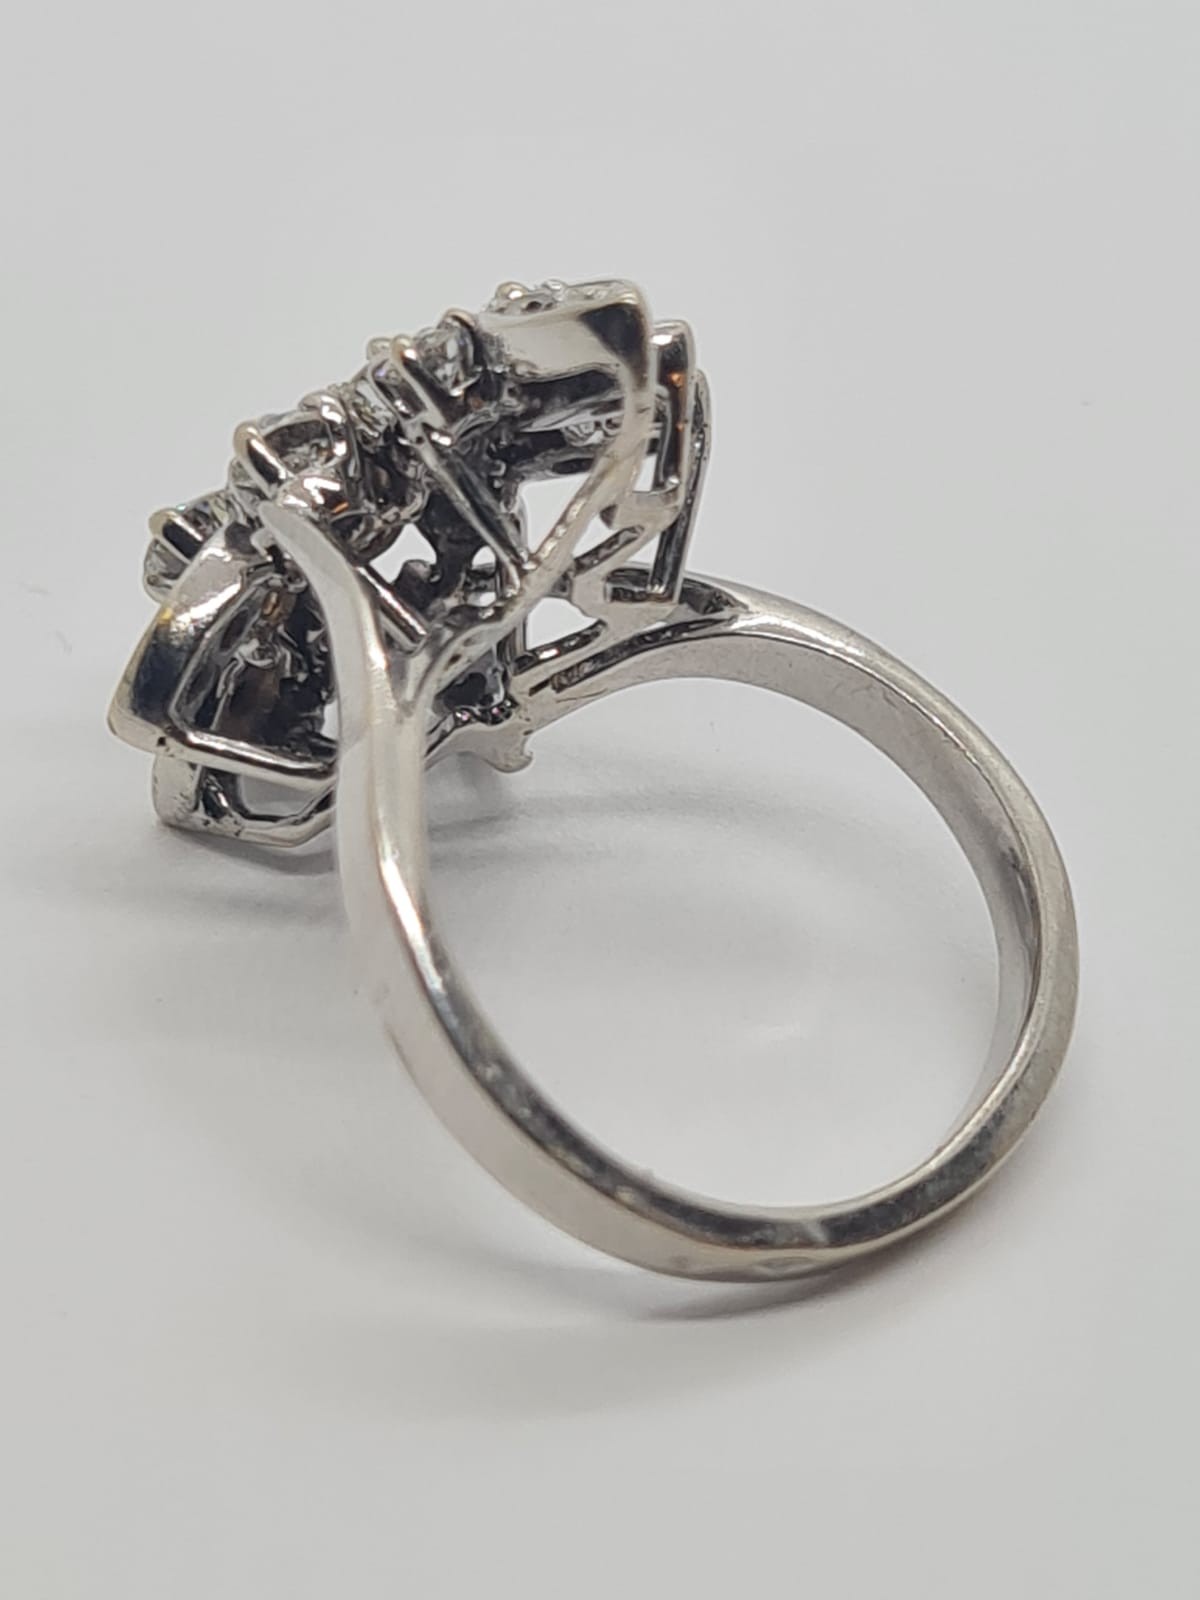 18k white gold French diamond cluster ring with over 1ct quality diamonds, weight 5.2g and size J1/2 - Image 3 of 6